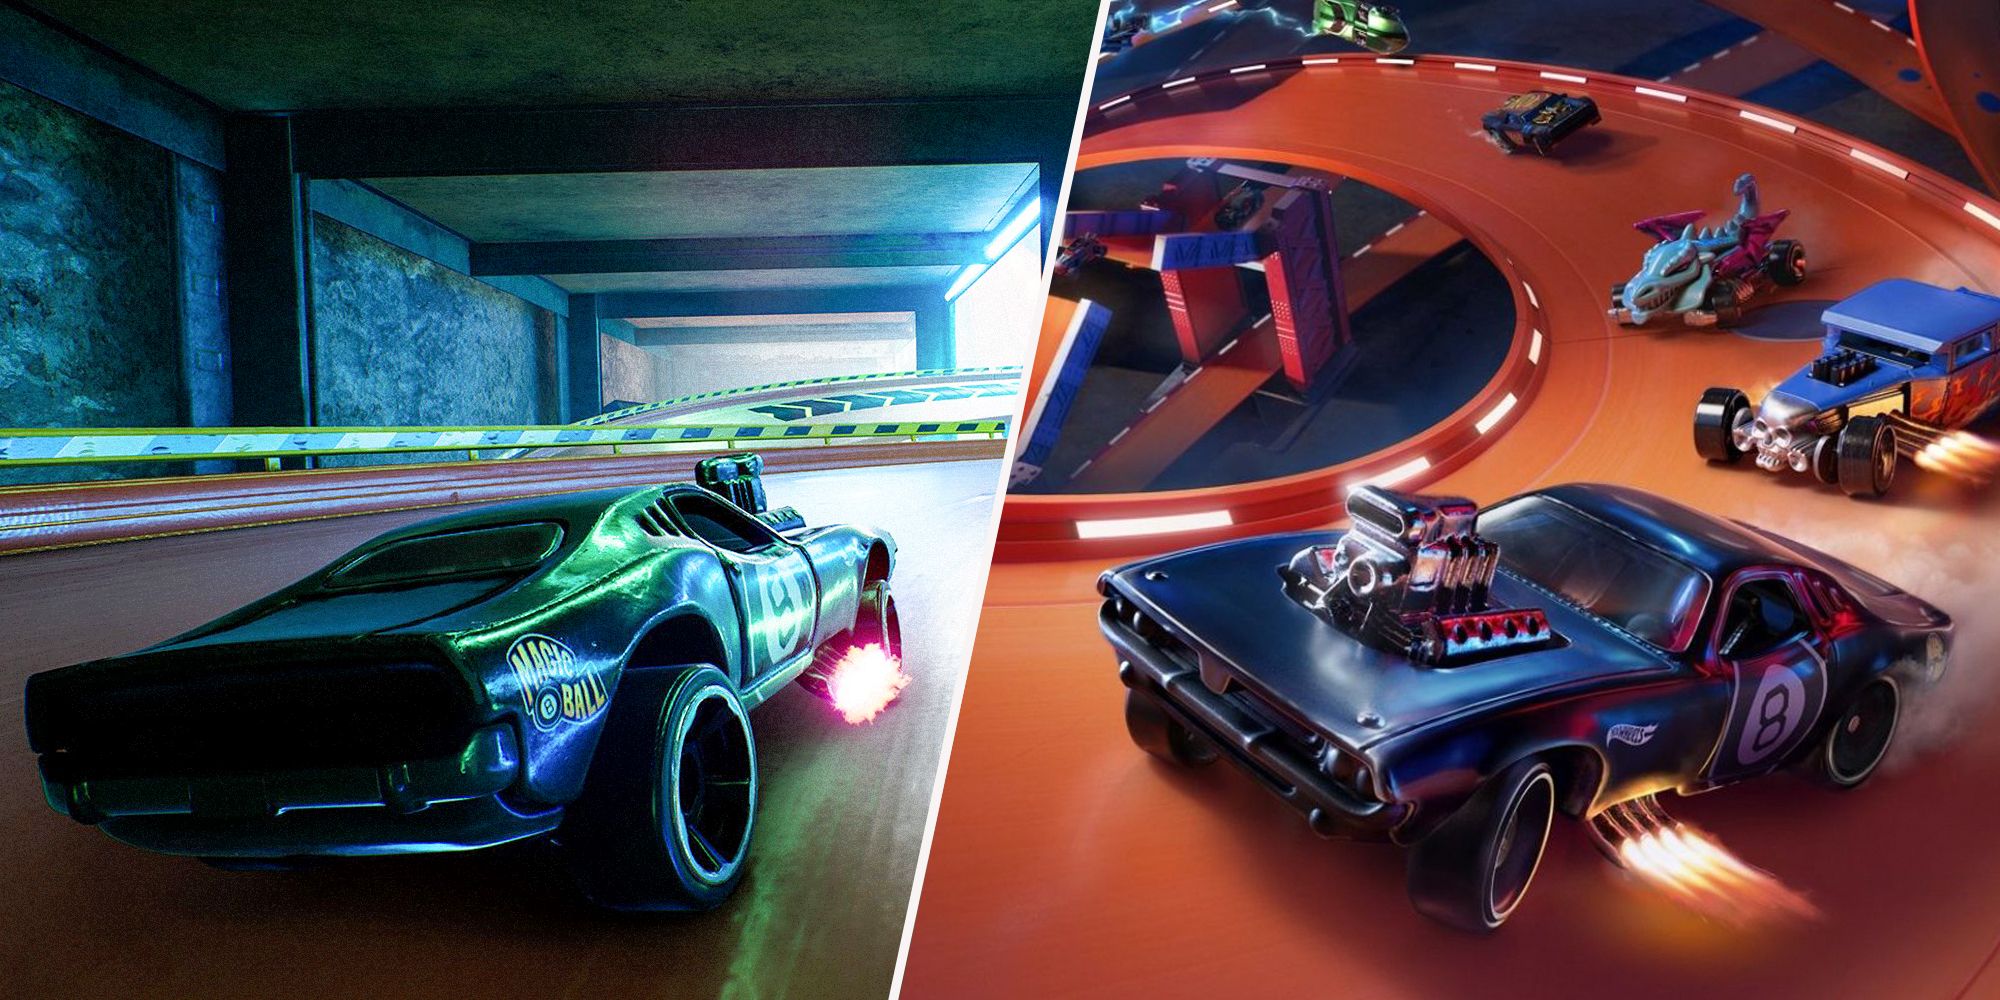 Two photos of cars racing in Hot Wheels Unleashed. The left is a blue and green car on a long track, the right are multiple cars racing each other on a track going downwards.